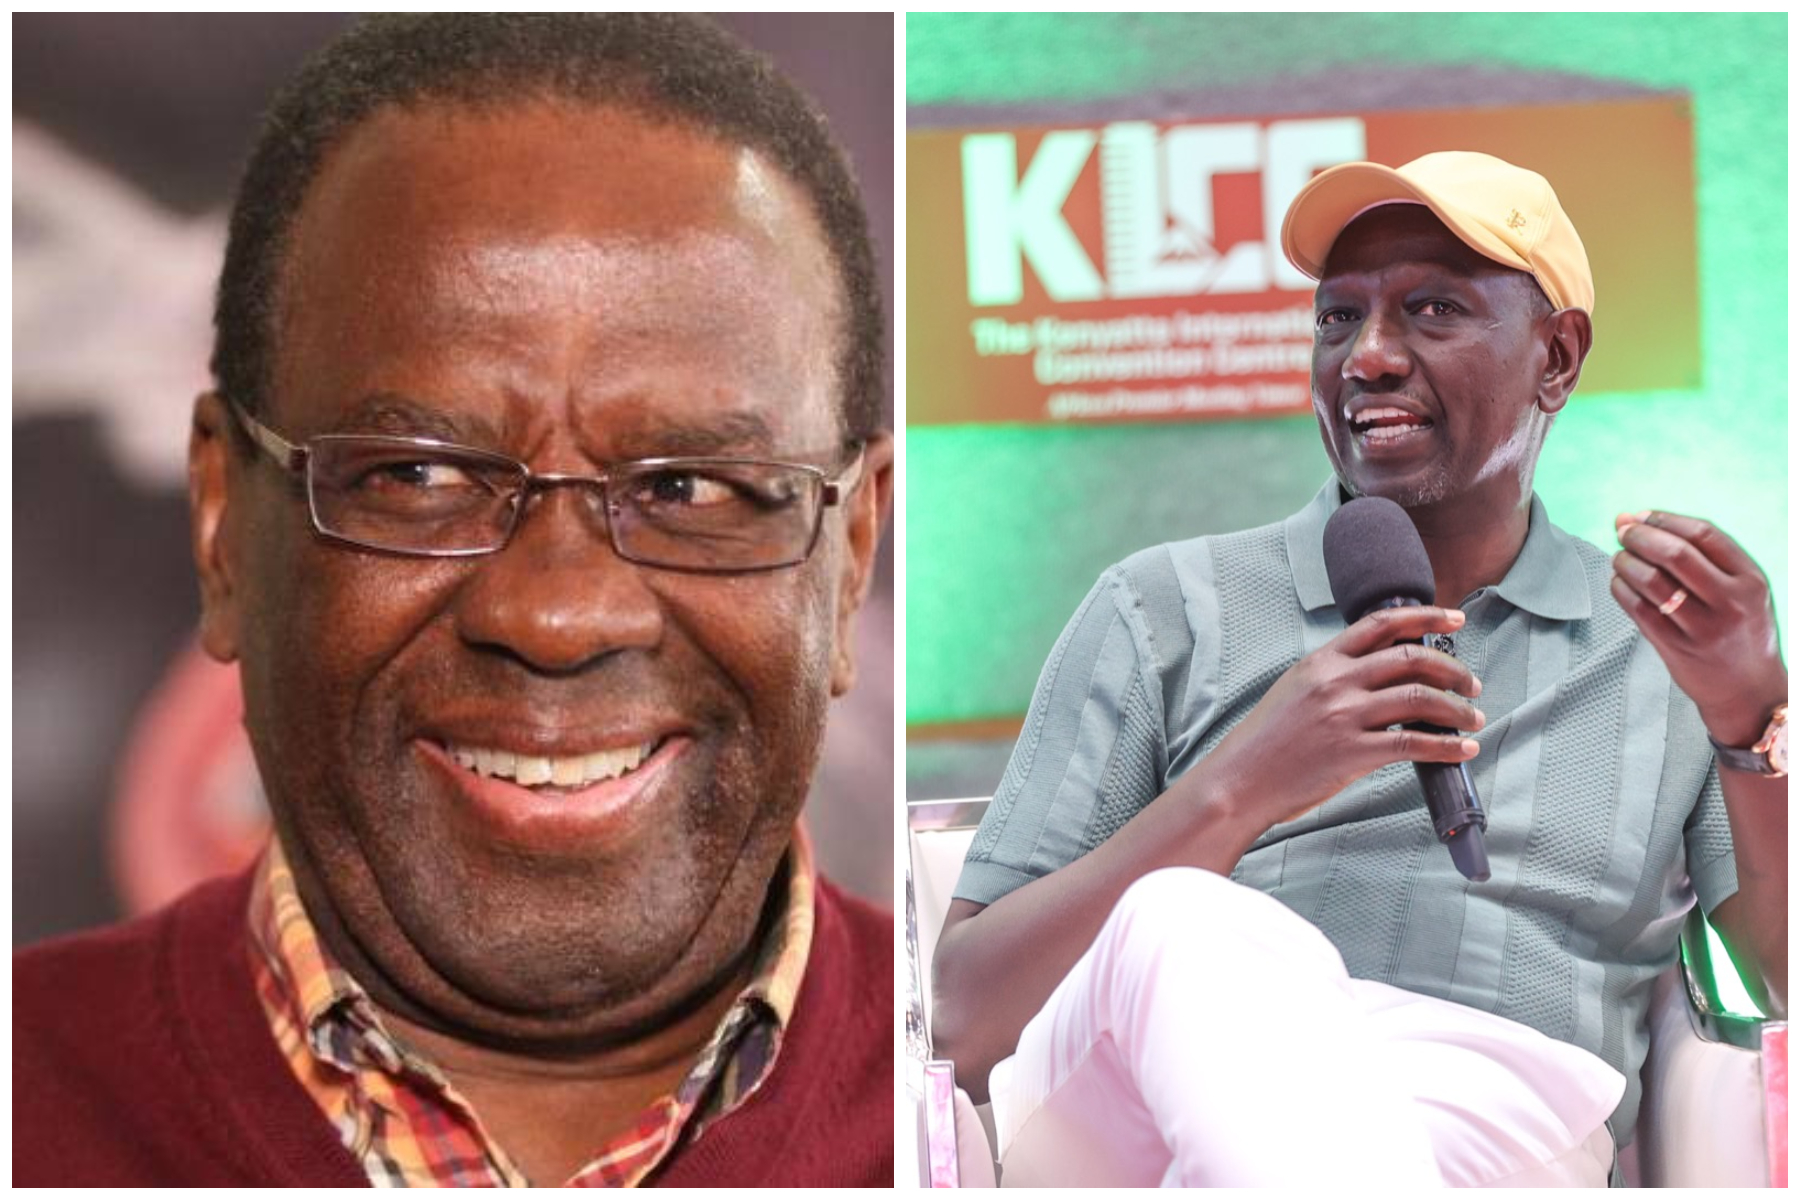 Photo collage of former Chief Justice Willy Mutunga and President William Ruto.